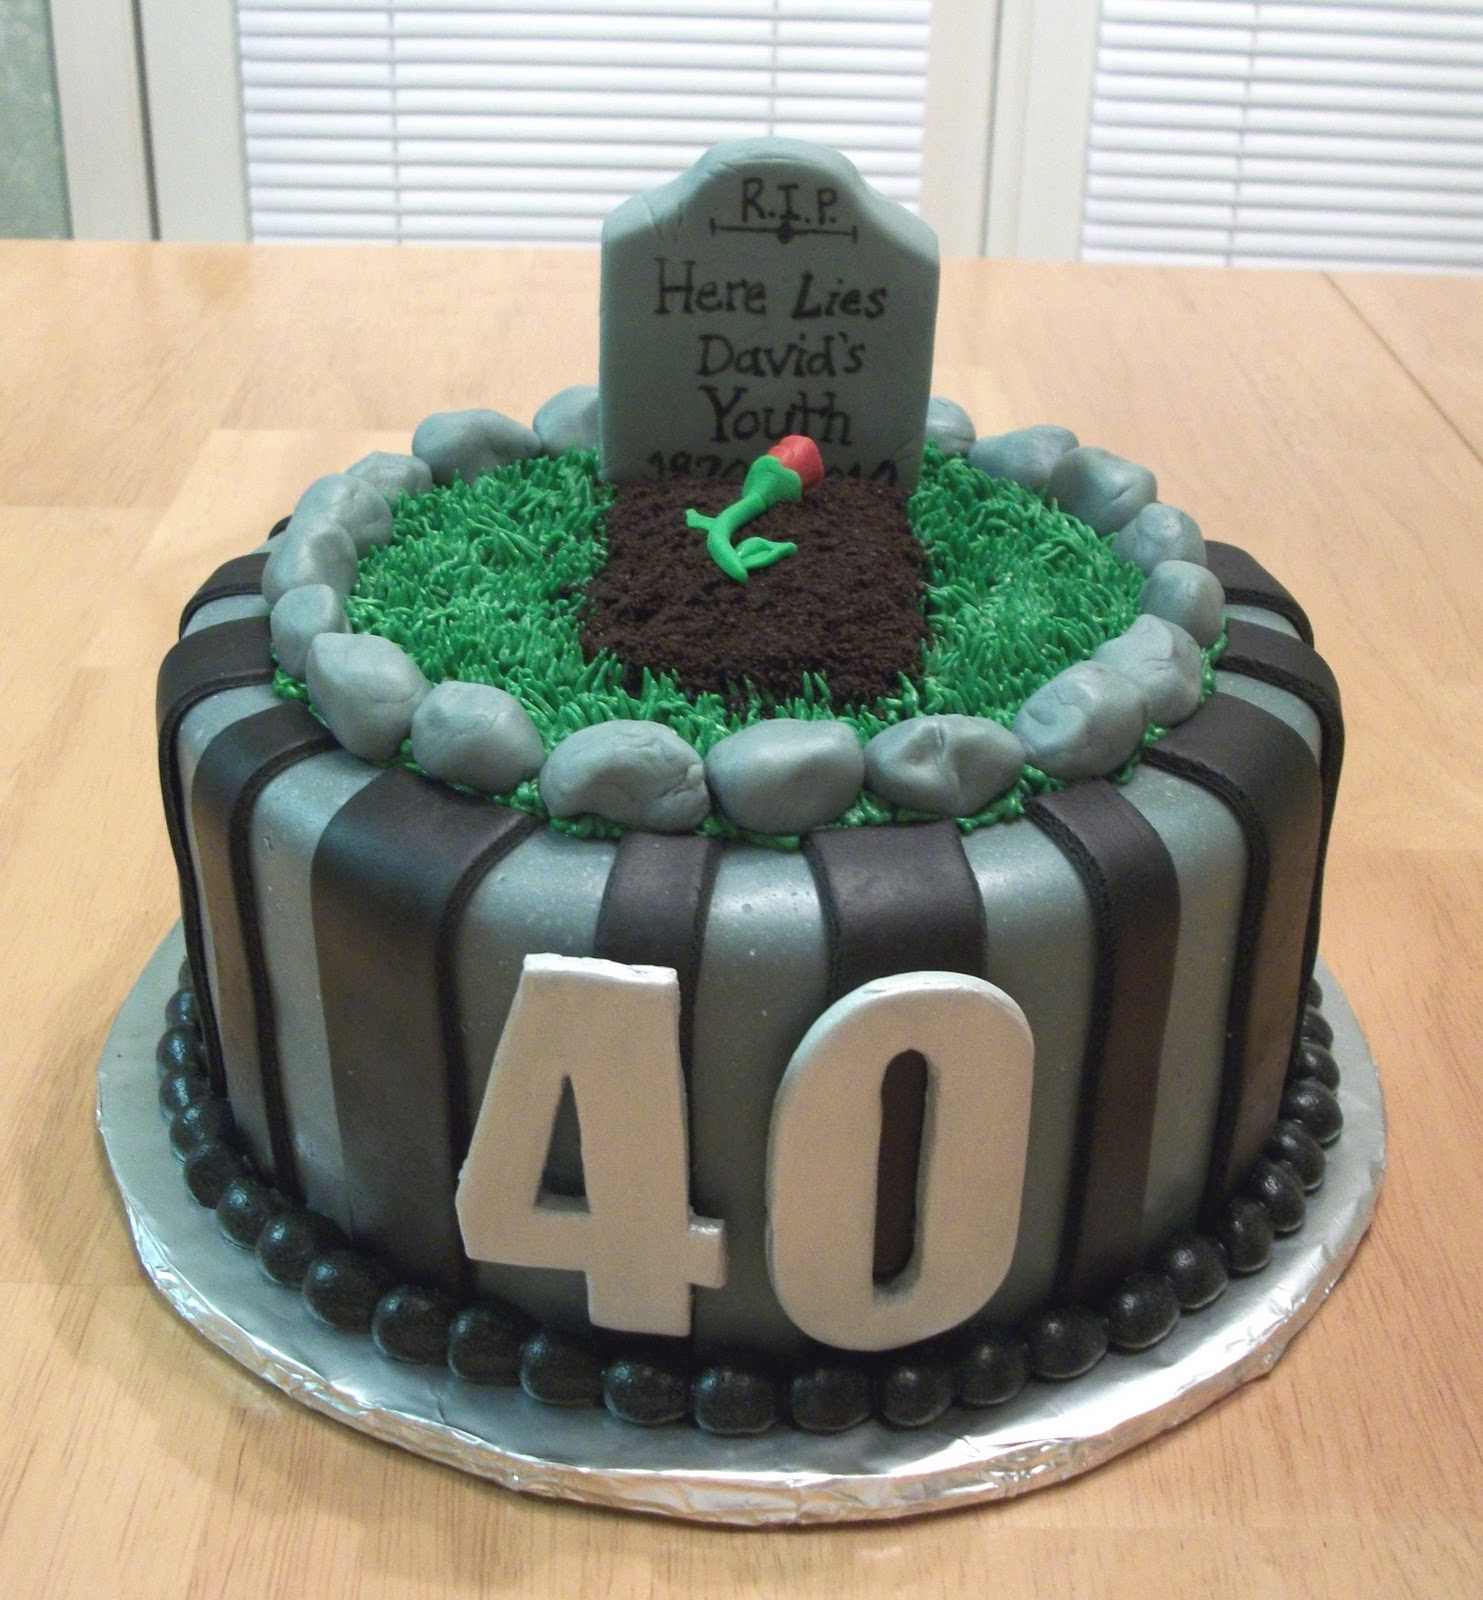 Bellissimo! Specialty Cakes "40th Birthday Cake"